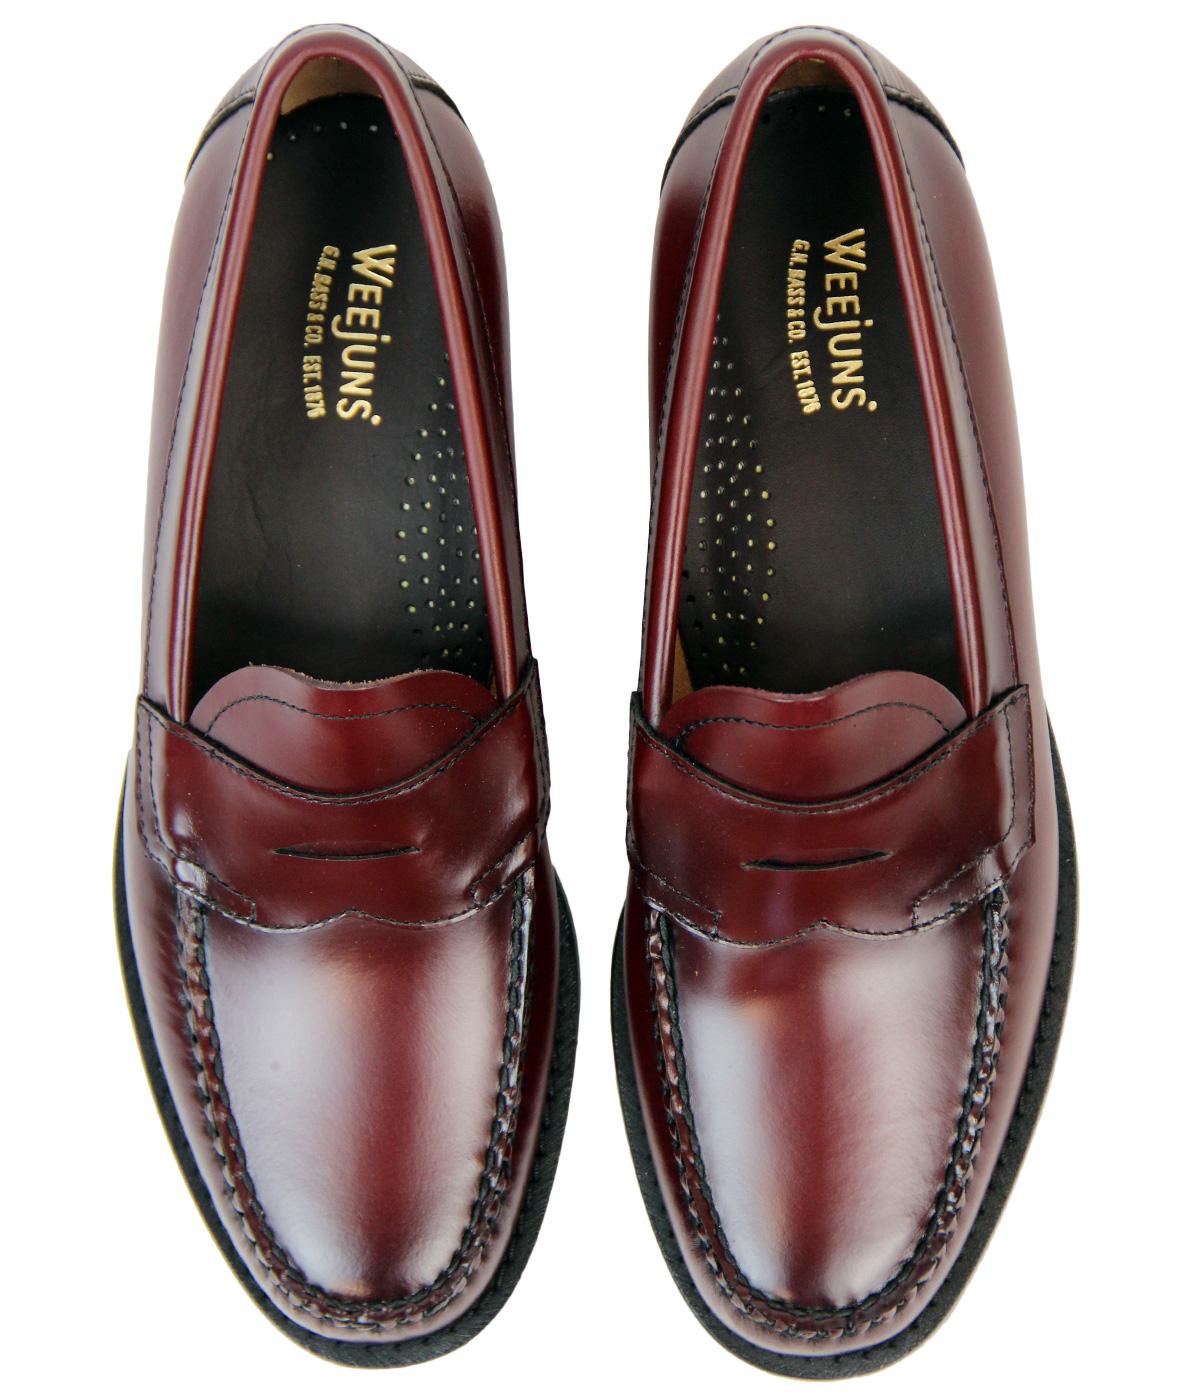 BASS WEEJUNS Logan Retro 60s Mod Classic Penny Loafer Shoes Wine